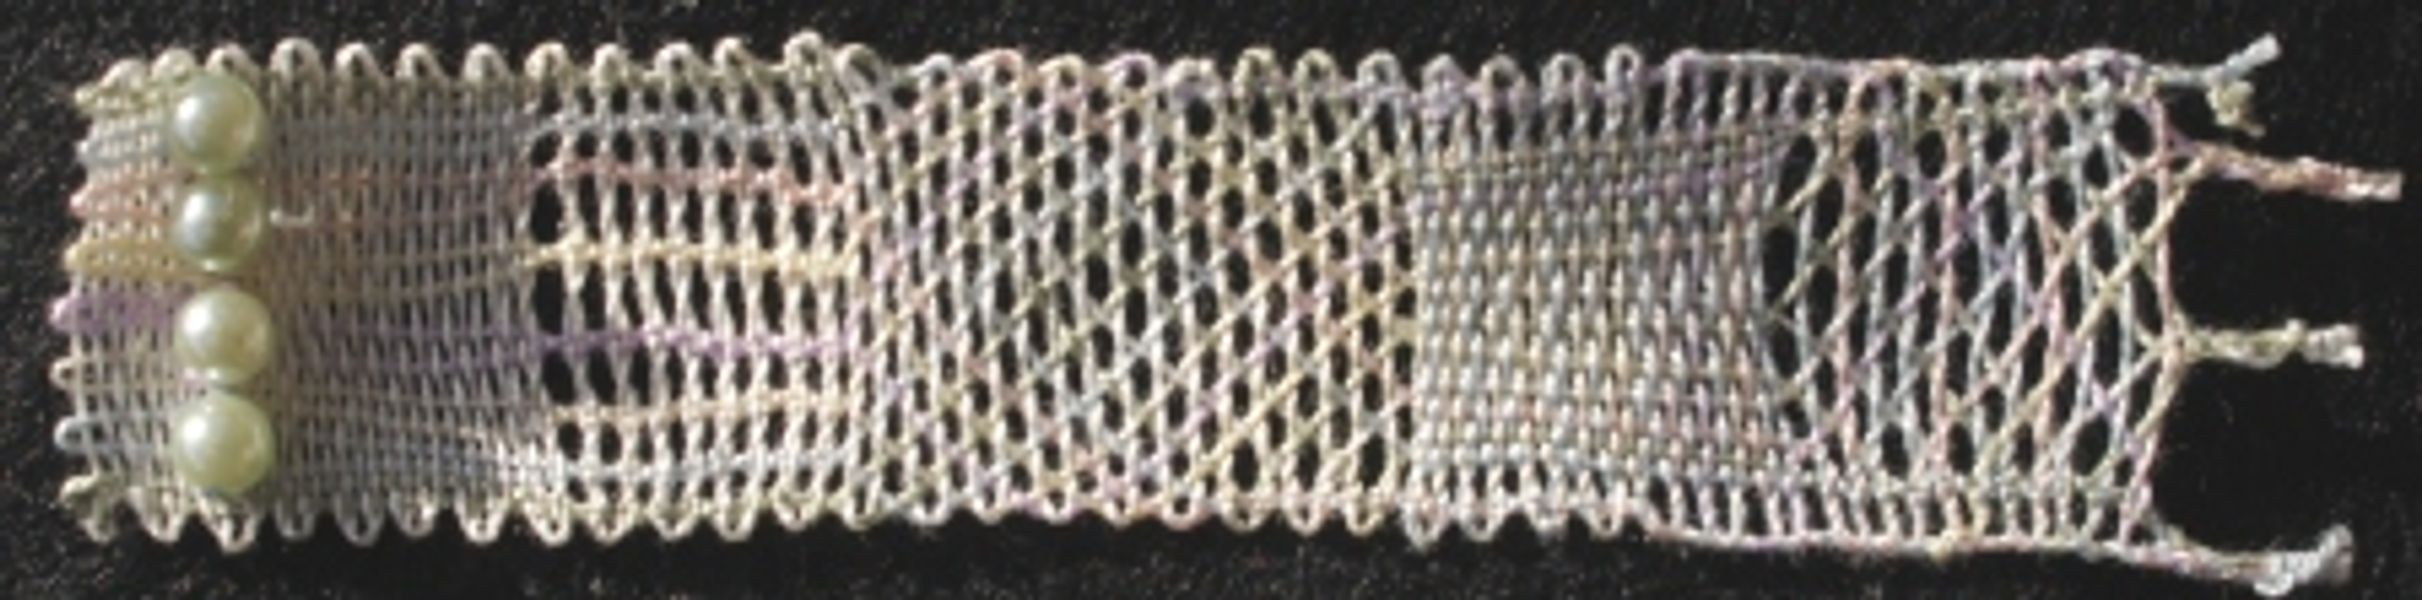 Beginners Lace - Basic Bandage Stiches (with Beads)